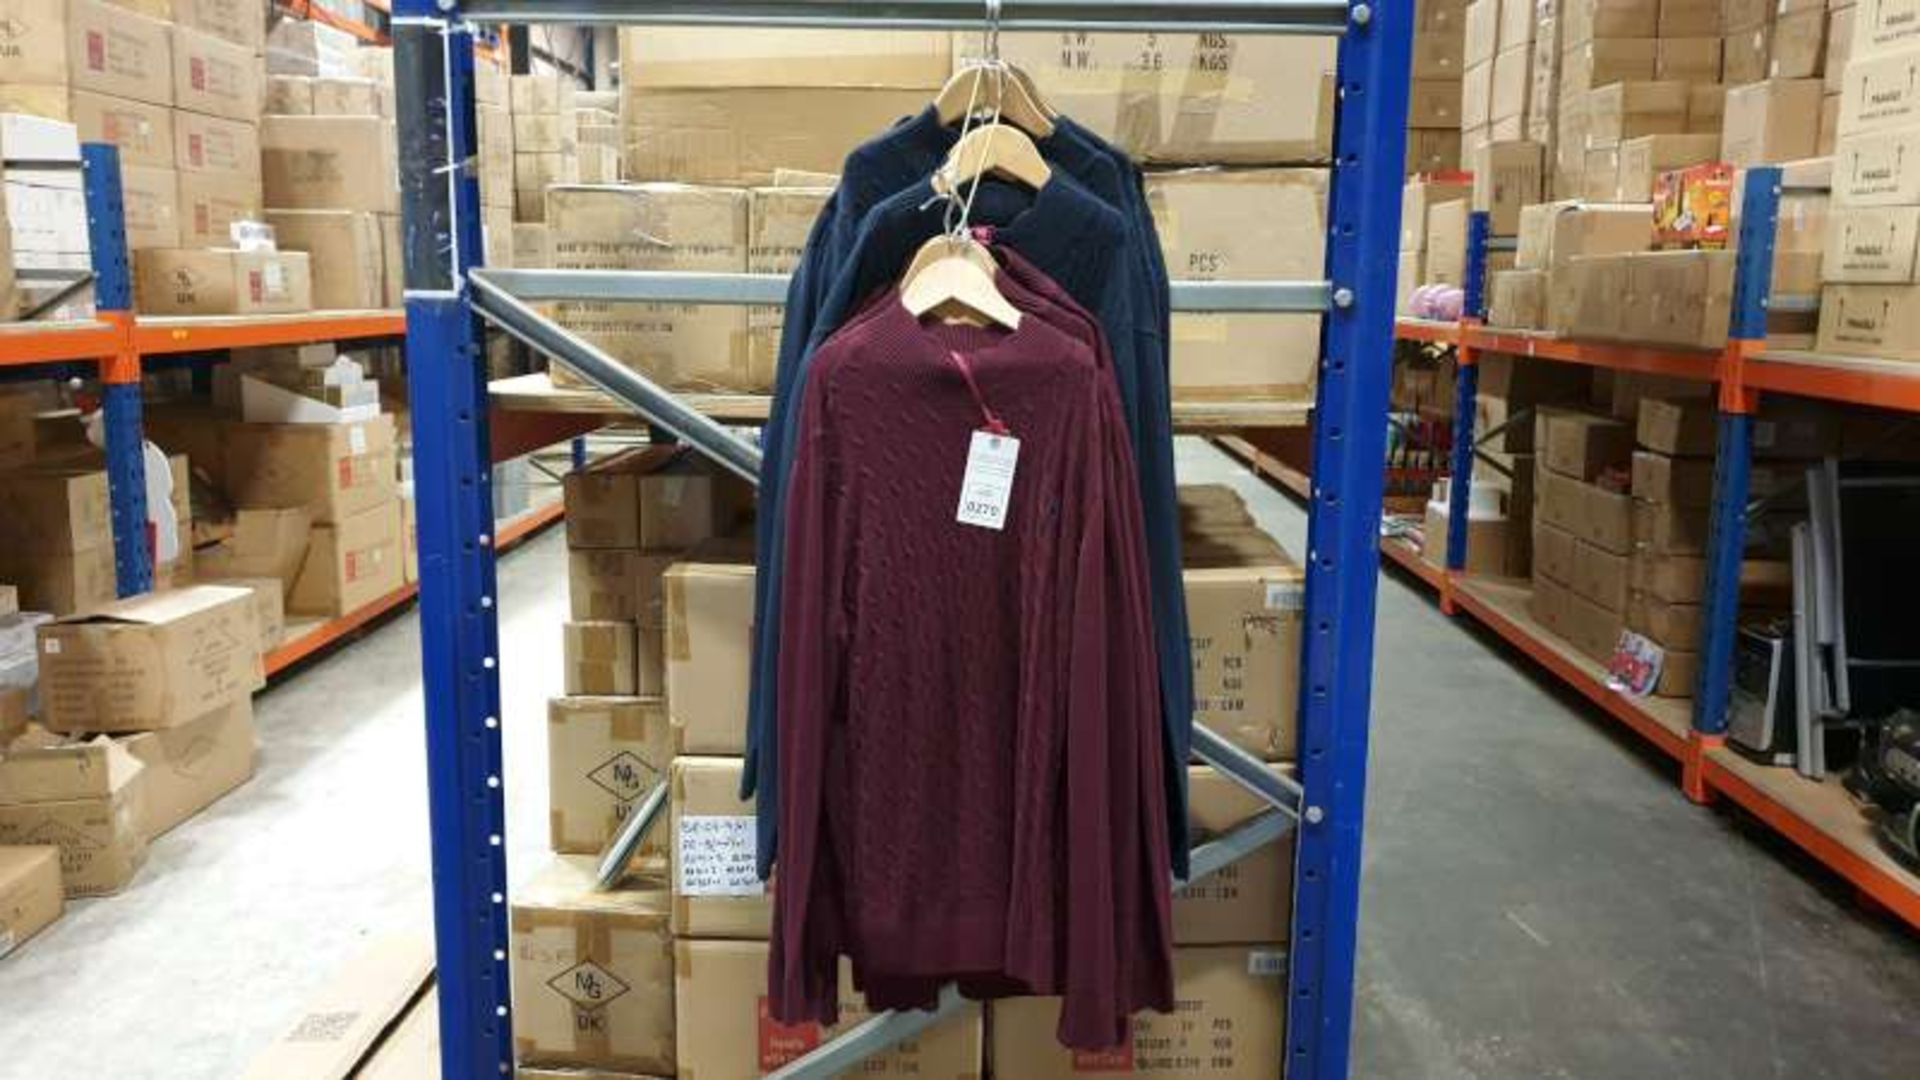 10 X LADIES JACK MURPHY WINTER LONG SLEEVED TOPS COLOURS BURGUNDY AND NAVY IN VARIOUS SIZES